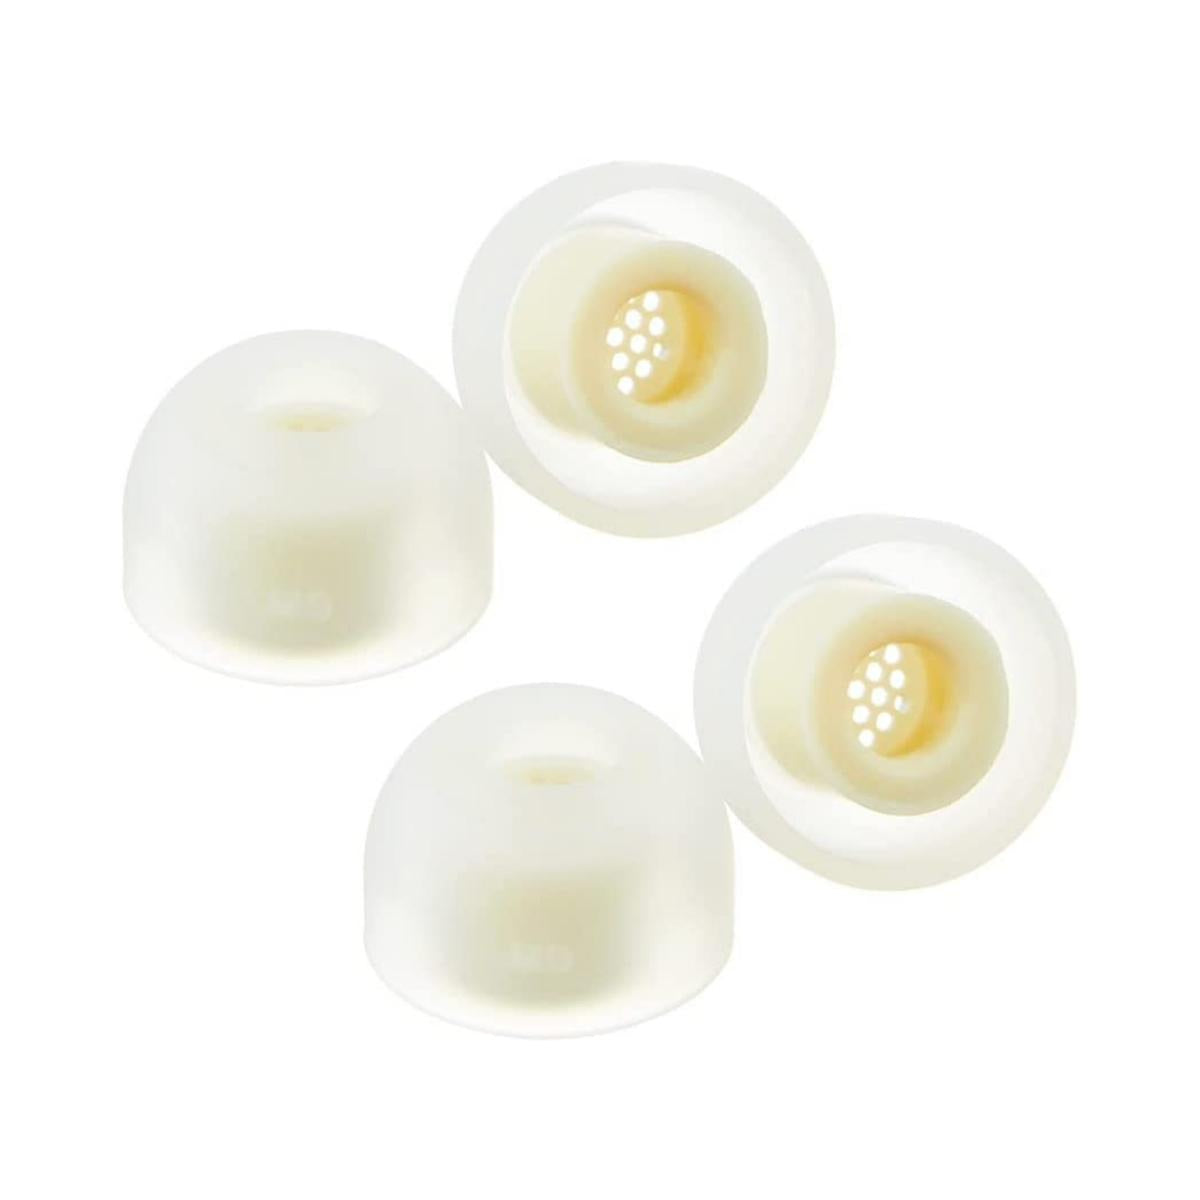 AZLA SednaEarfit MAX Eartips For IEMs